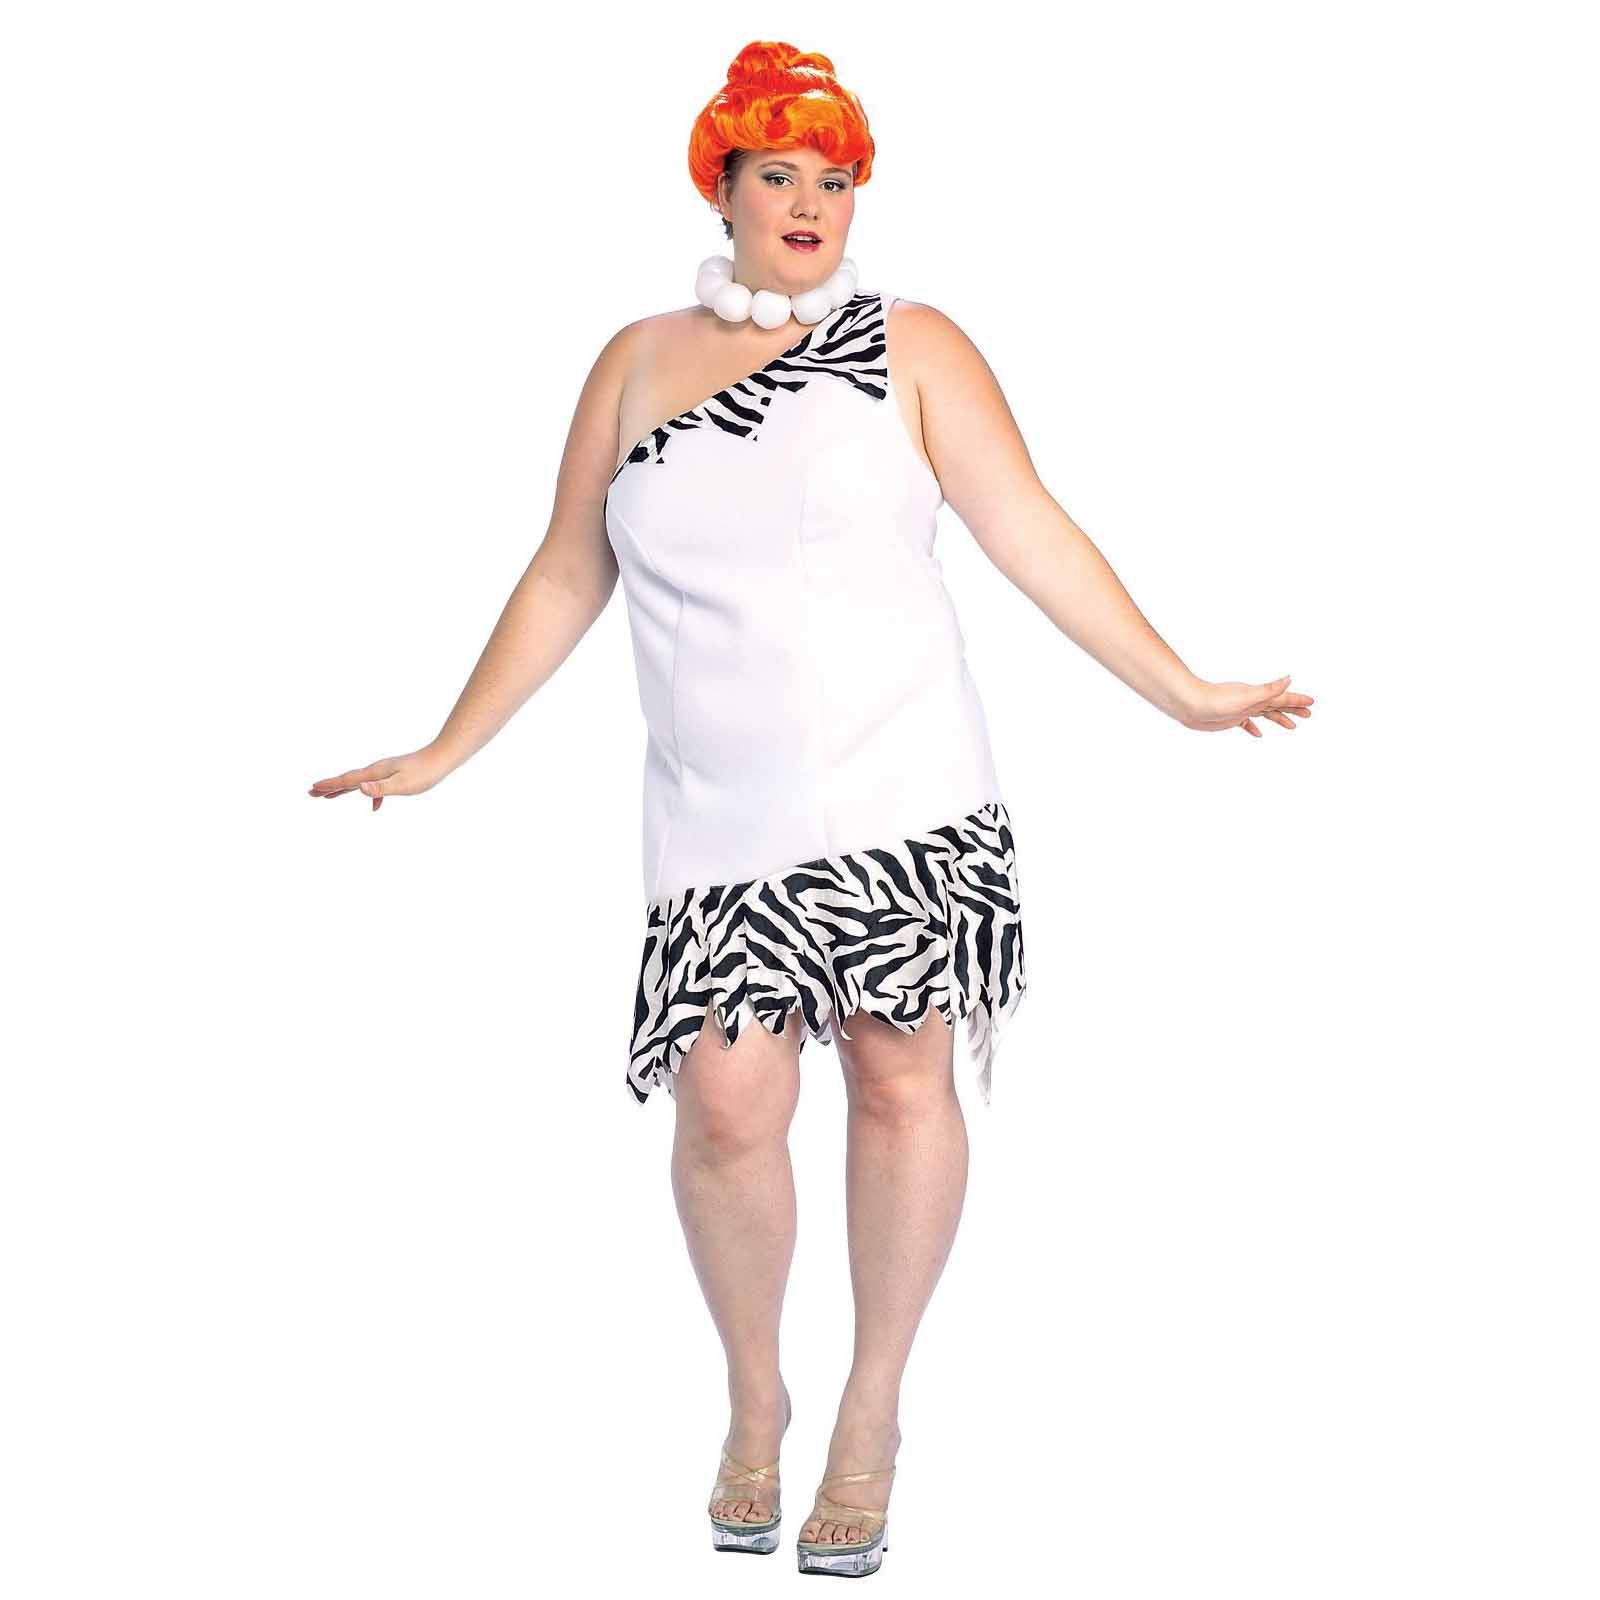 This fabulous Wilma Flintstone costume would be perfect for a TV, Jungle or...